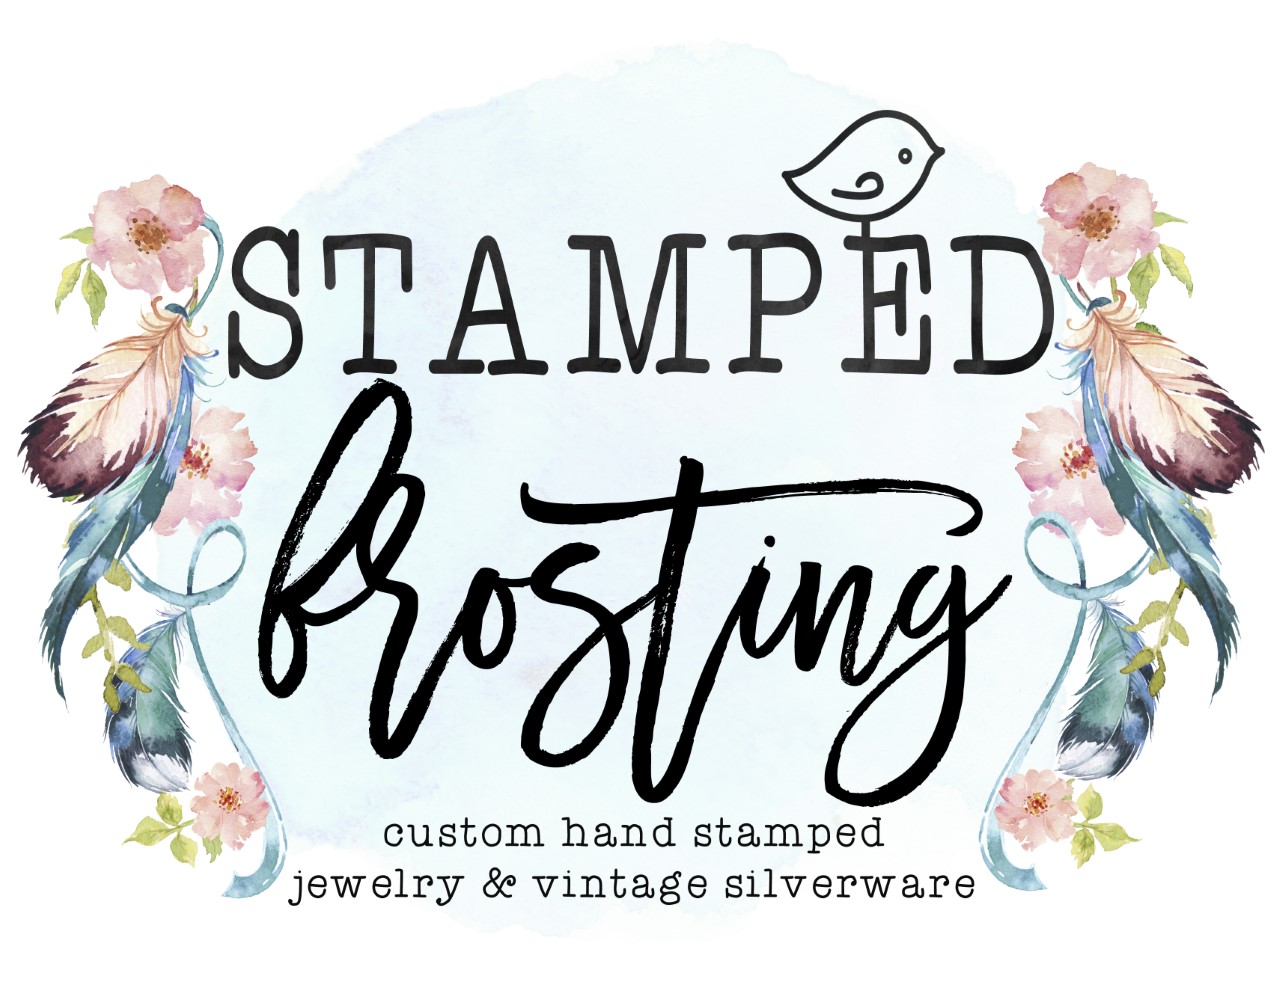 STAMPED FROSTING